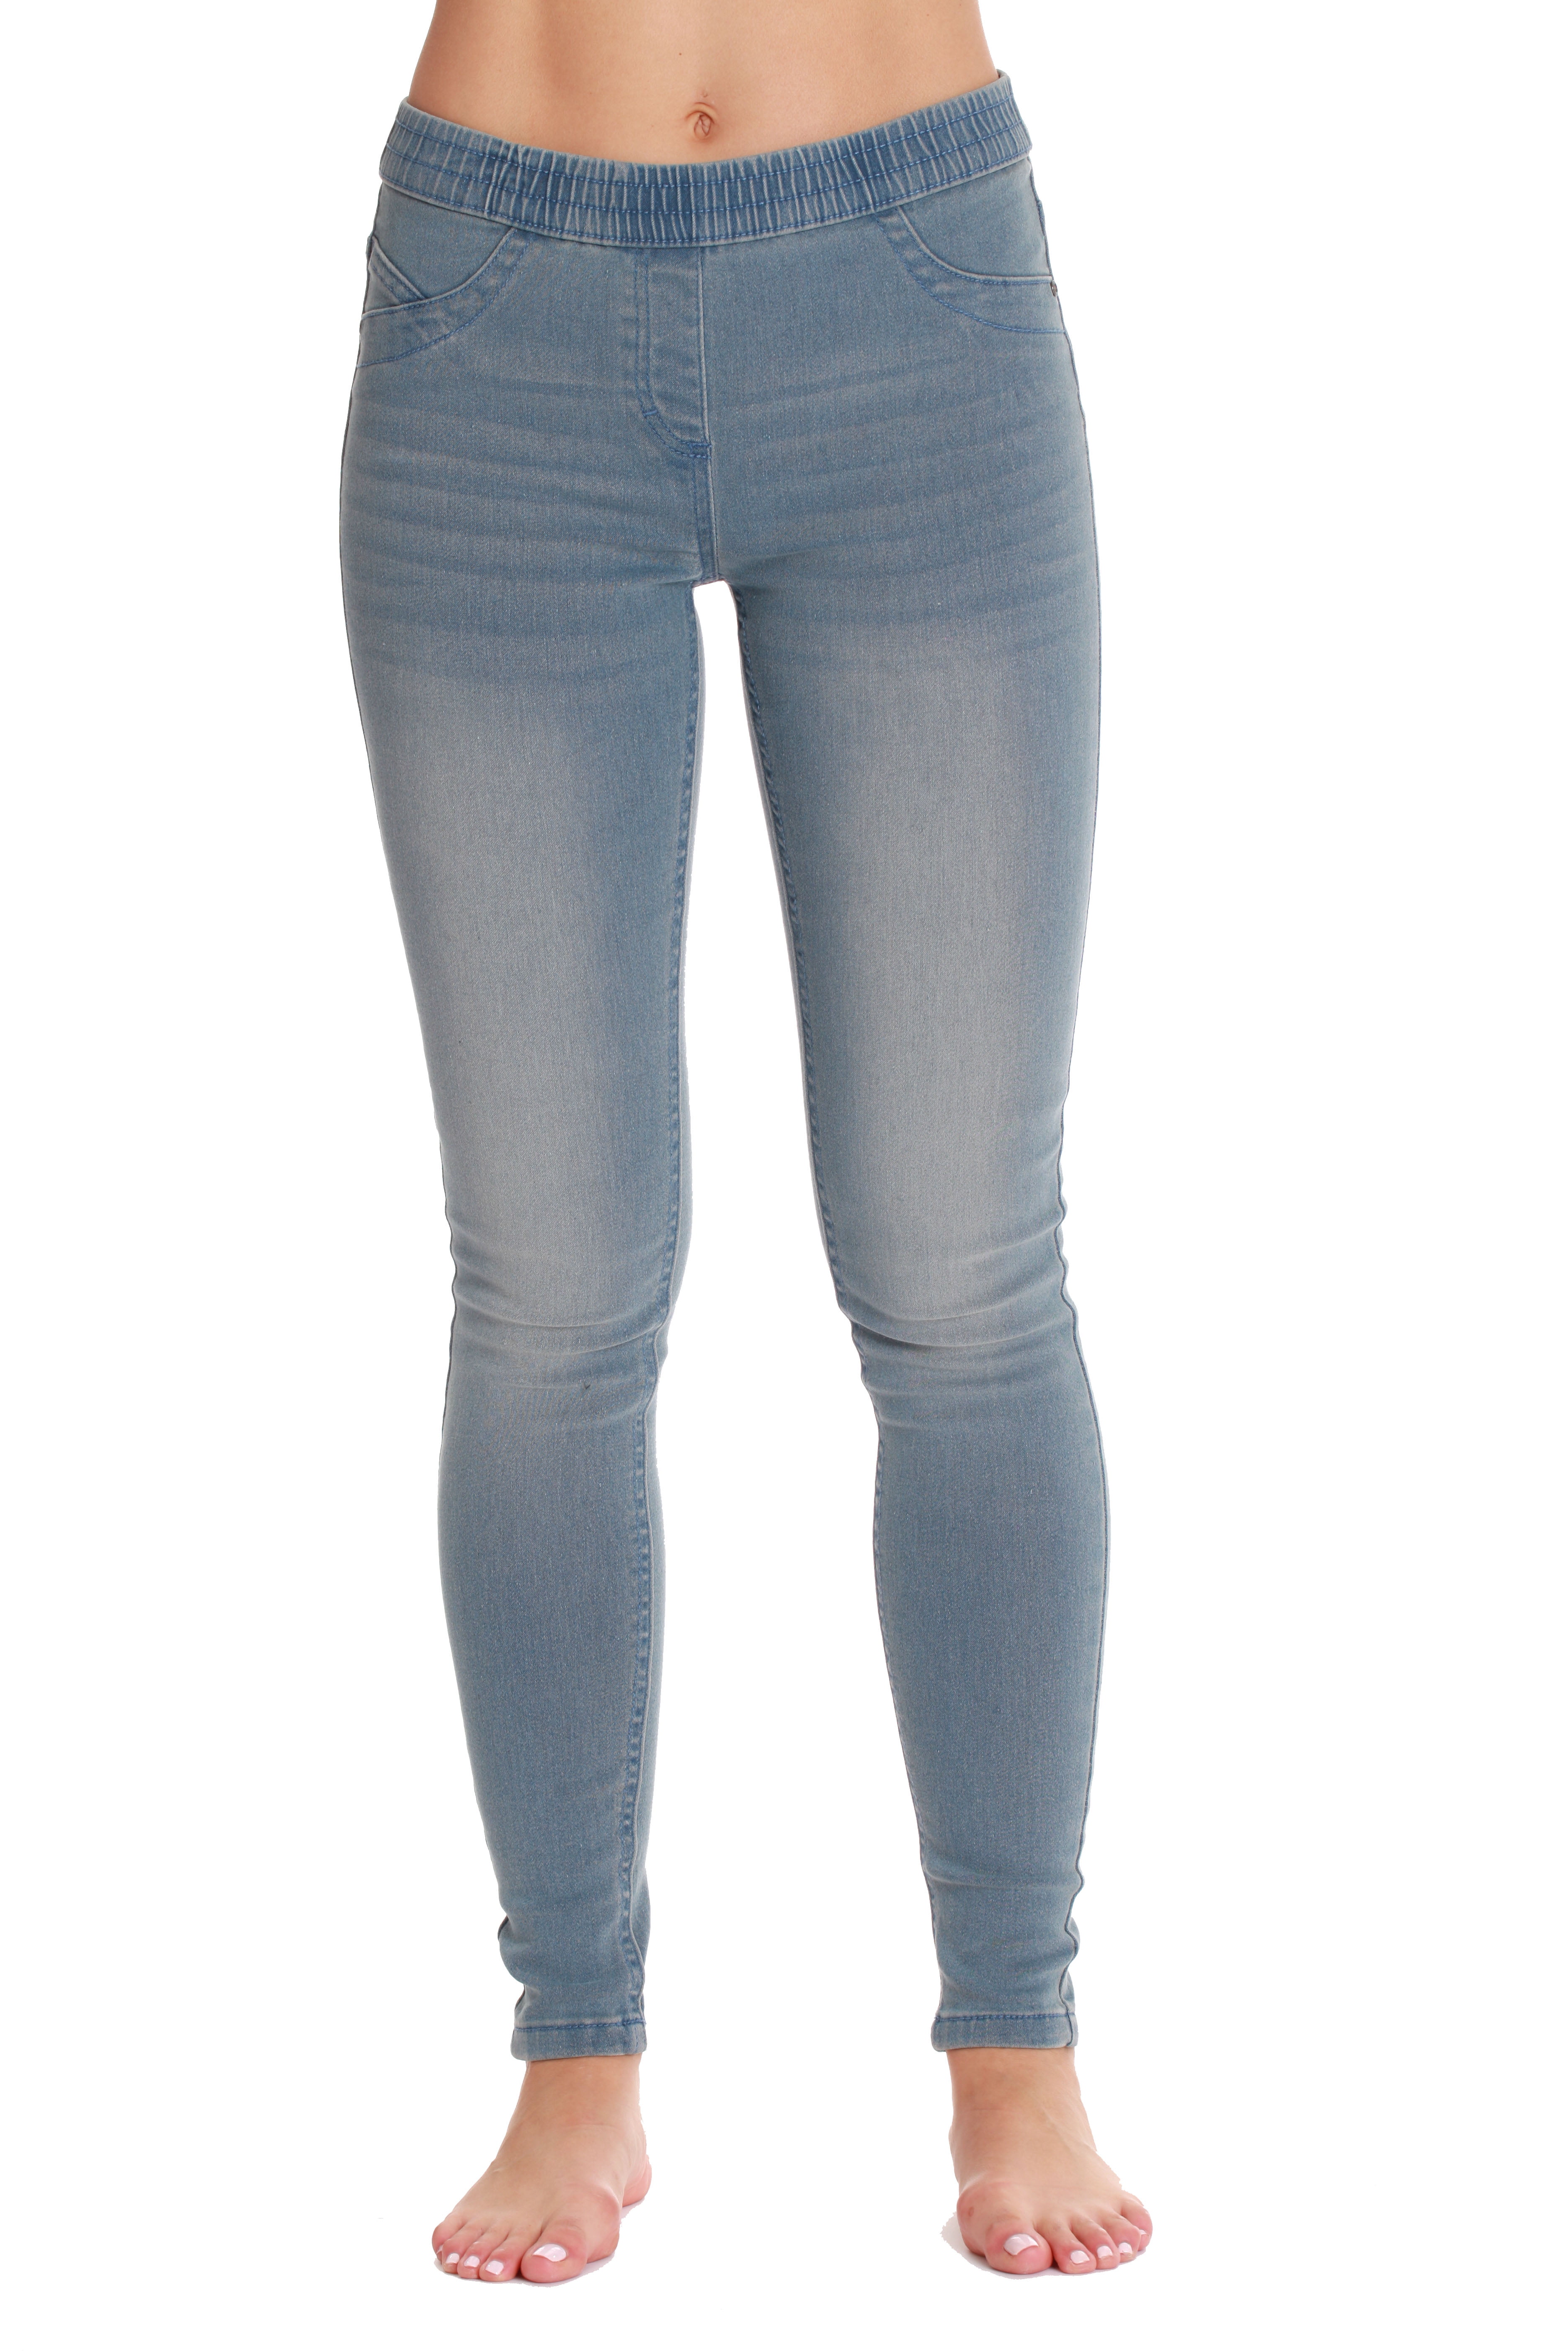 Just Love Womens Denim Jeggings with Pockets - Nepal